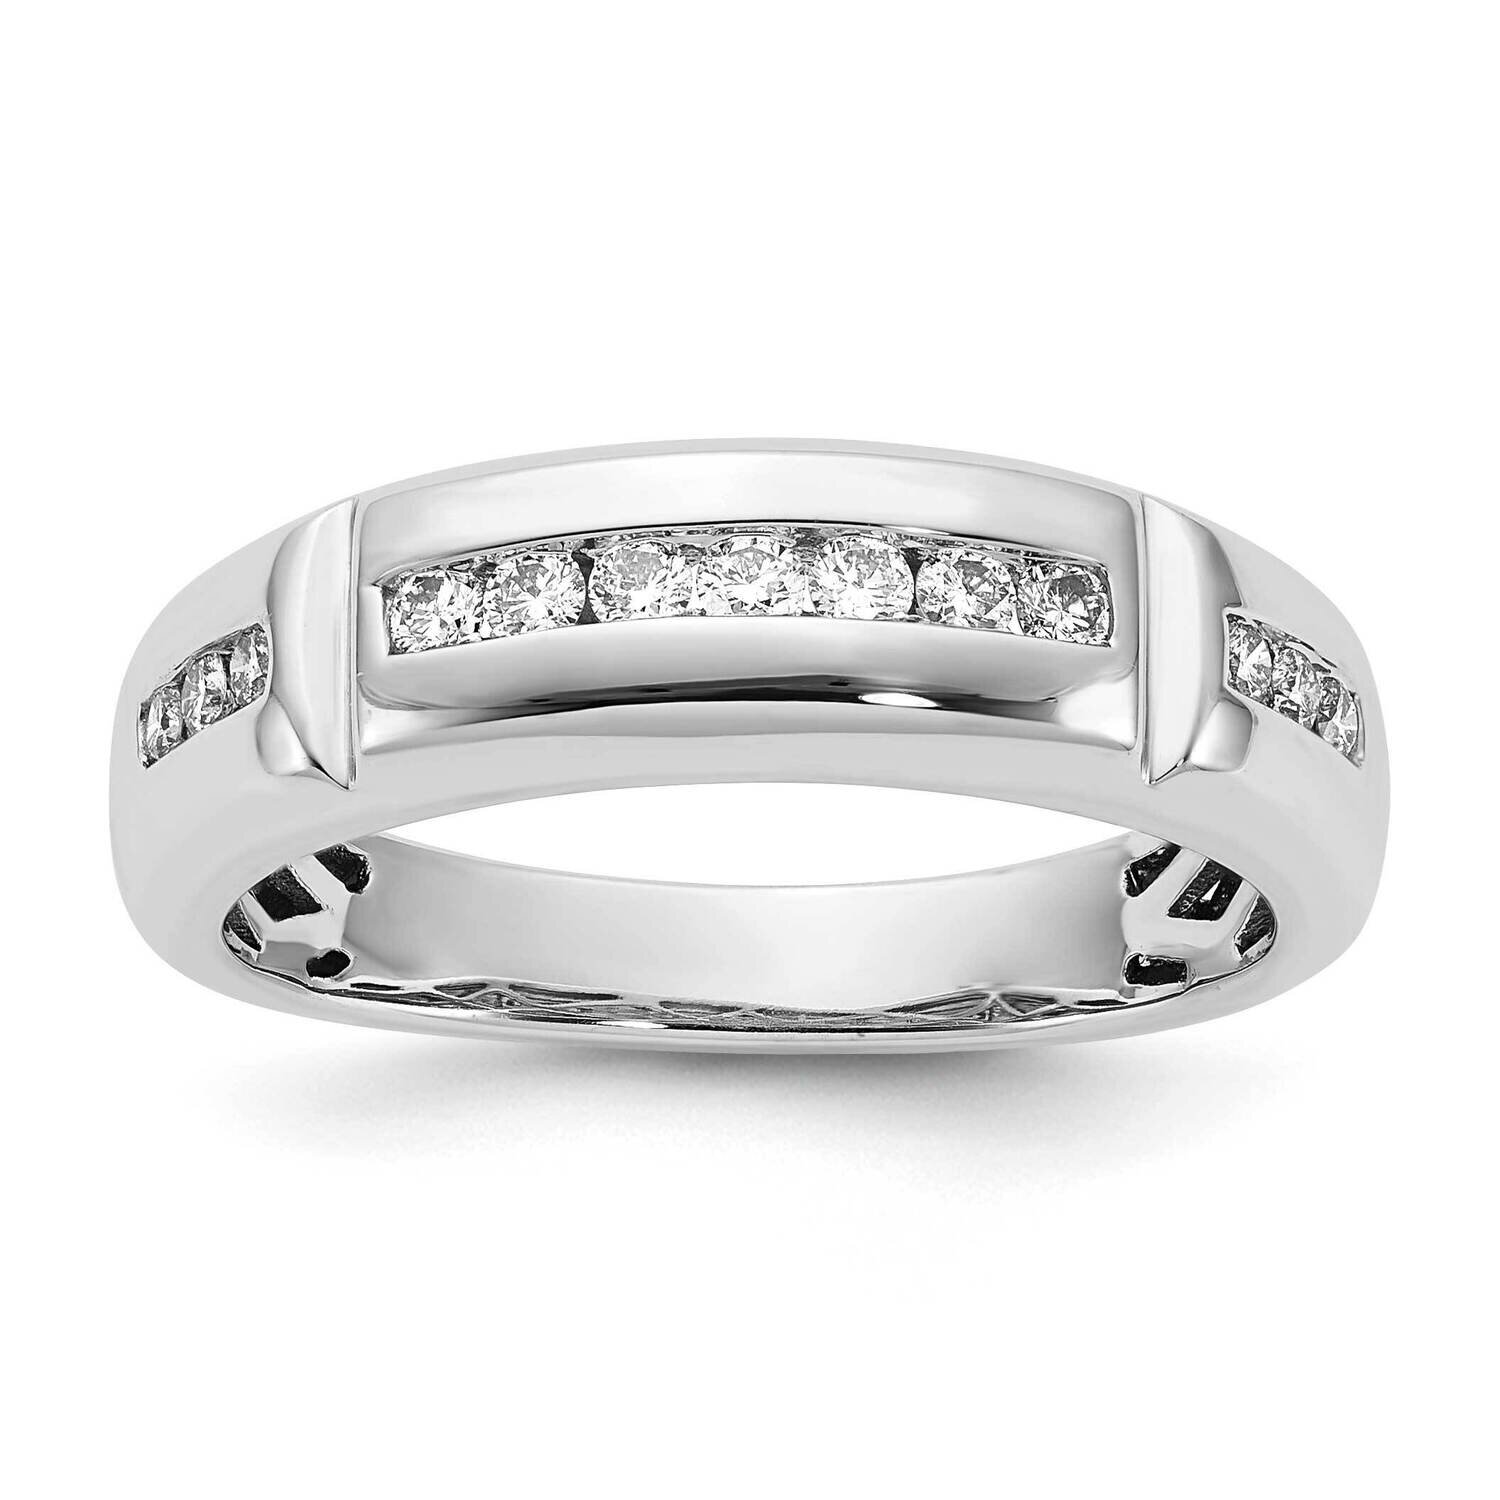 10k Gold White Gold Polished Grooved Diamond Ring RDD2862G-0W